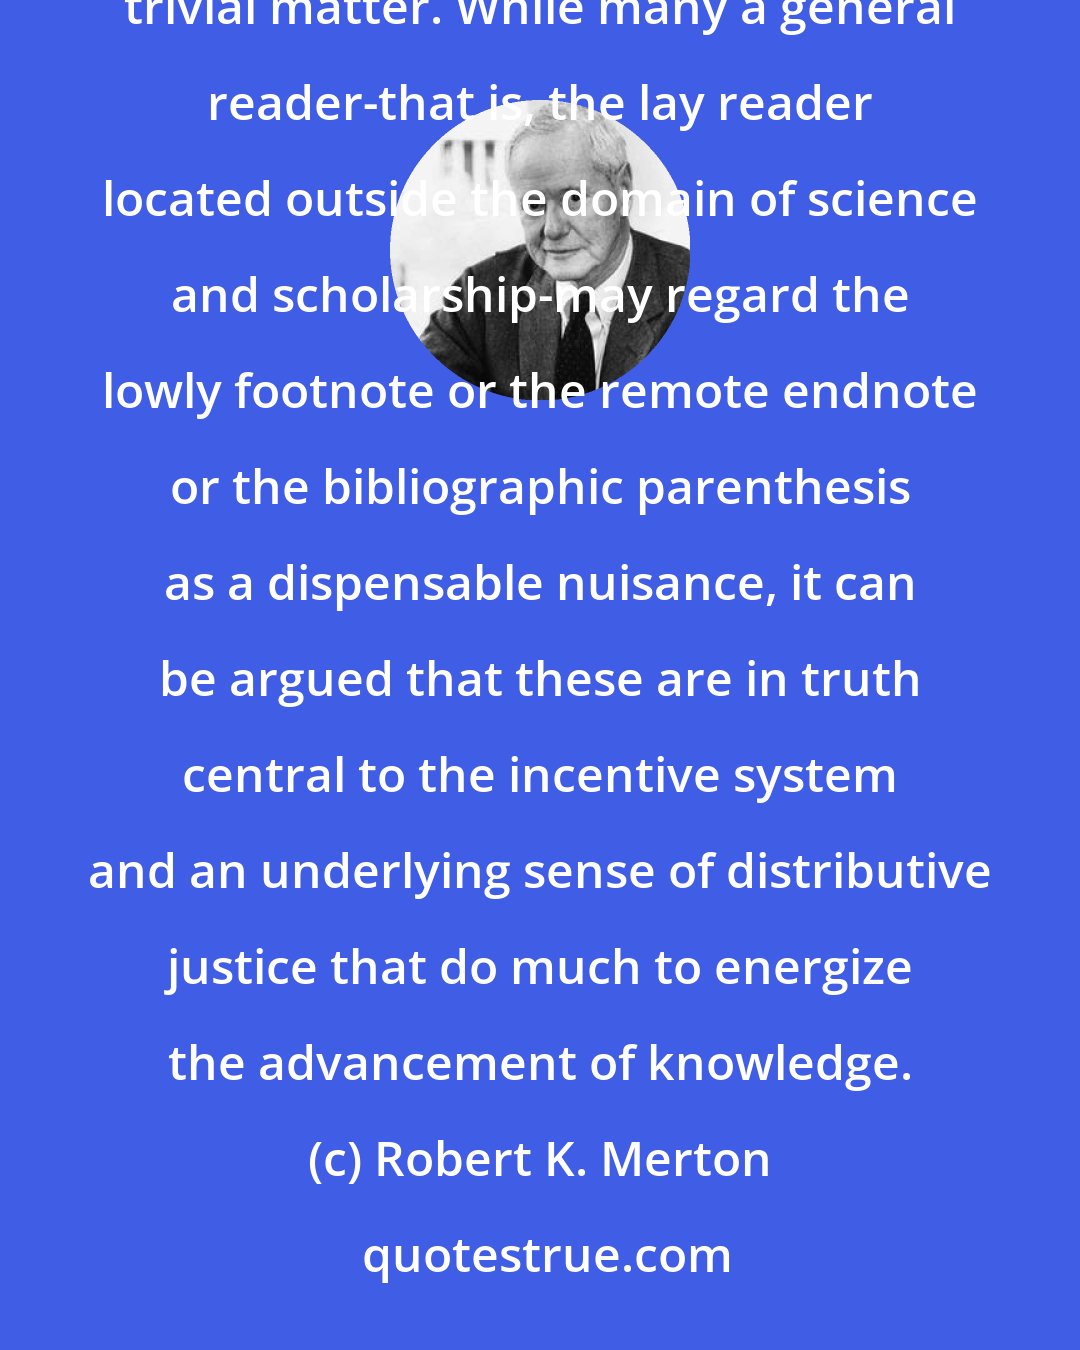 Robert K. Merton: We thus begin to see that the institutionalized practice of citations and references in the sphere of learning is not a trivial matter. While many a general reader-that is, the lay reader located outside the domain of science and scholarship-may regard the lowly footnote or the remote endnote or the bibliographic parenthesis as a dispensable nuisance, it can be argued that these are in truth central to the incentive system and an underlying sense of distributive justice that do much to energize the advancement of knowledge.